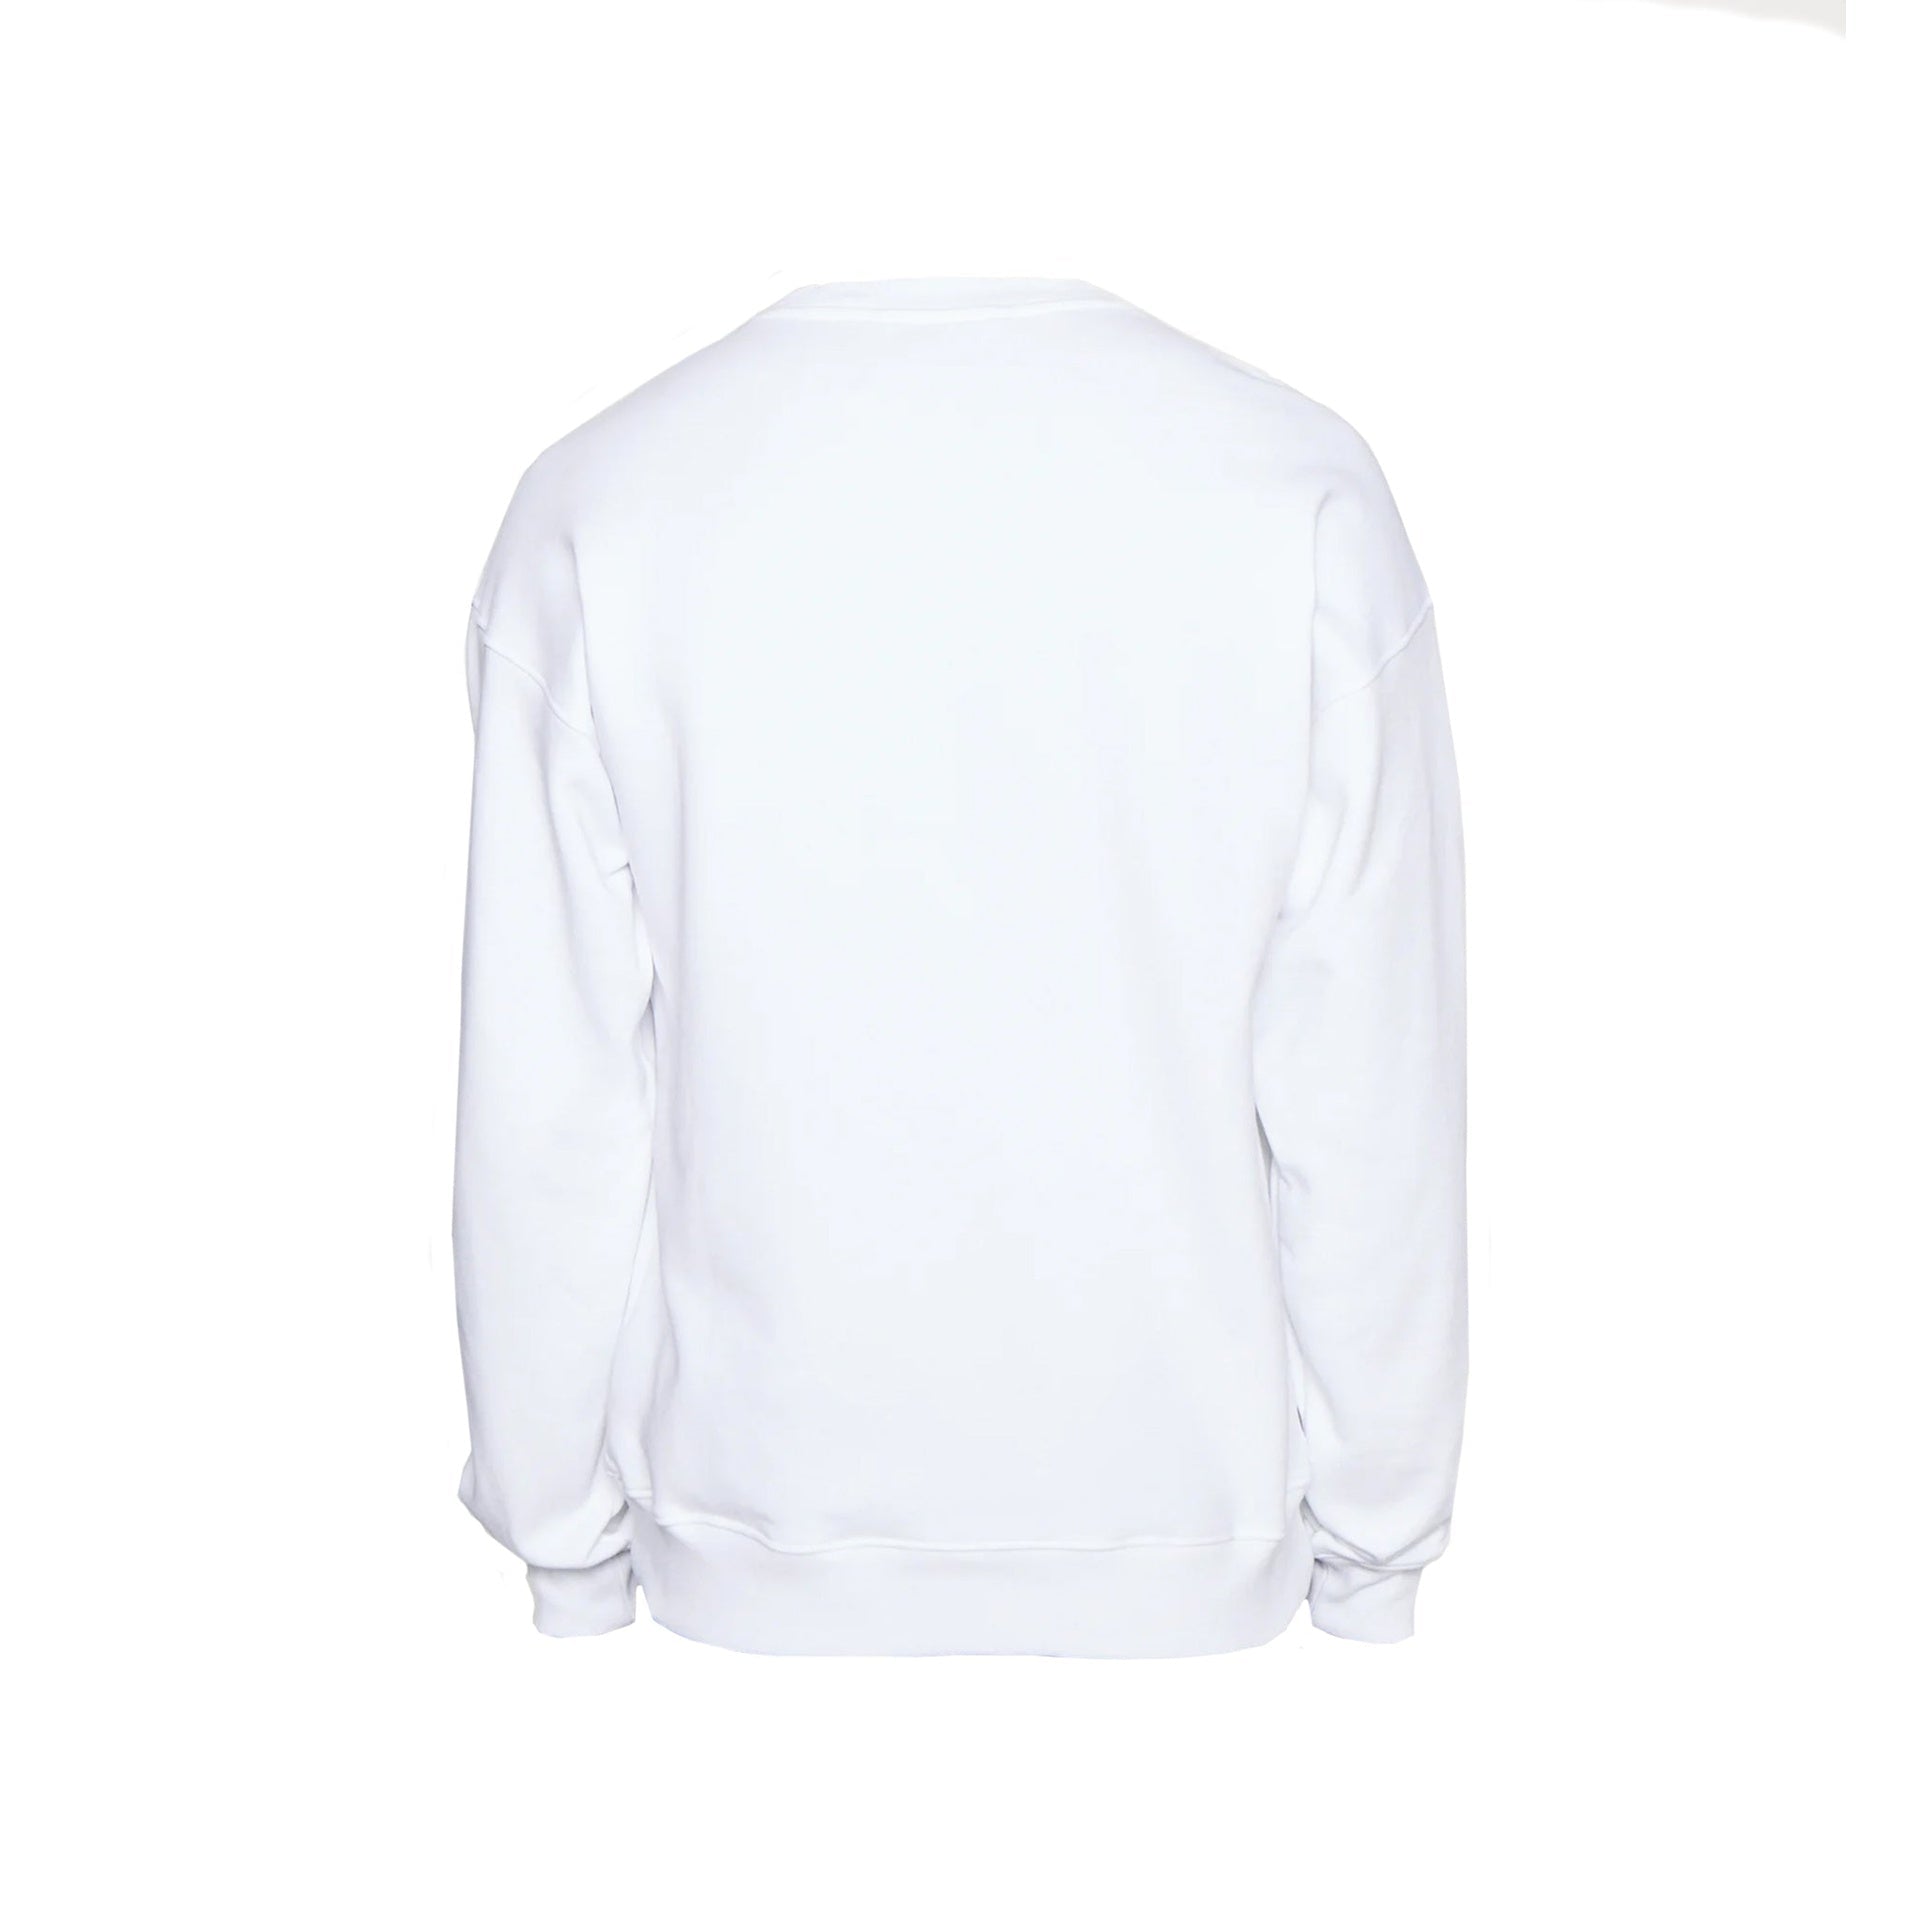 MOSCHINO-COUTURE-OUTLET-SALE-Moschino-Couture-Cotton-Logo-Sweatshirt-Shirts-WHITE-40-ARCHIVE-COLLECTION-3.jpg